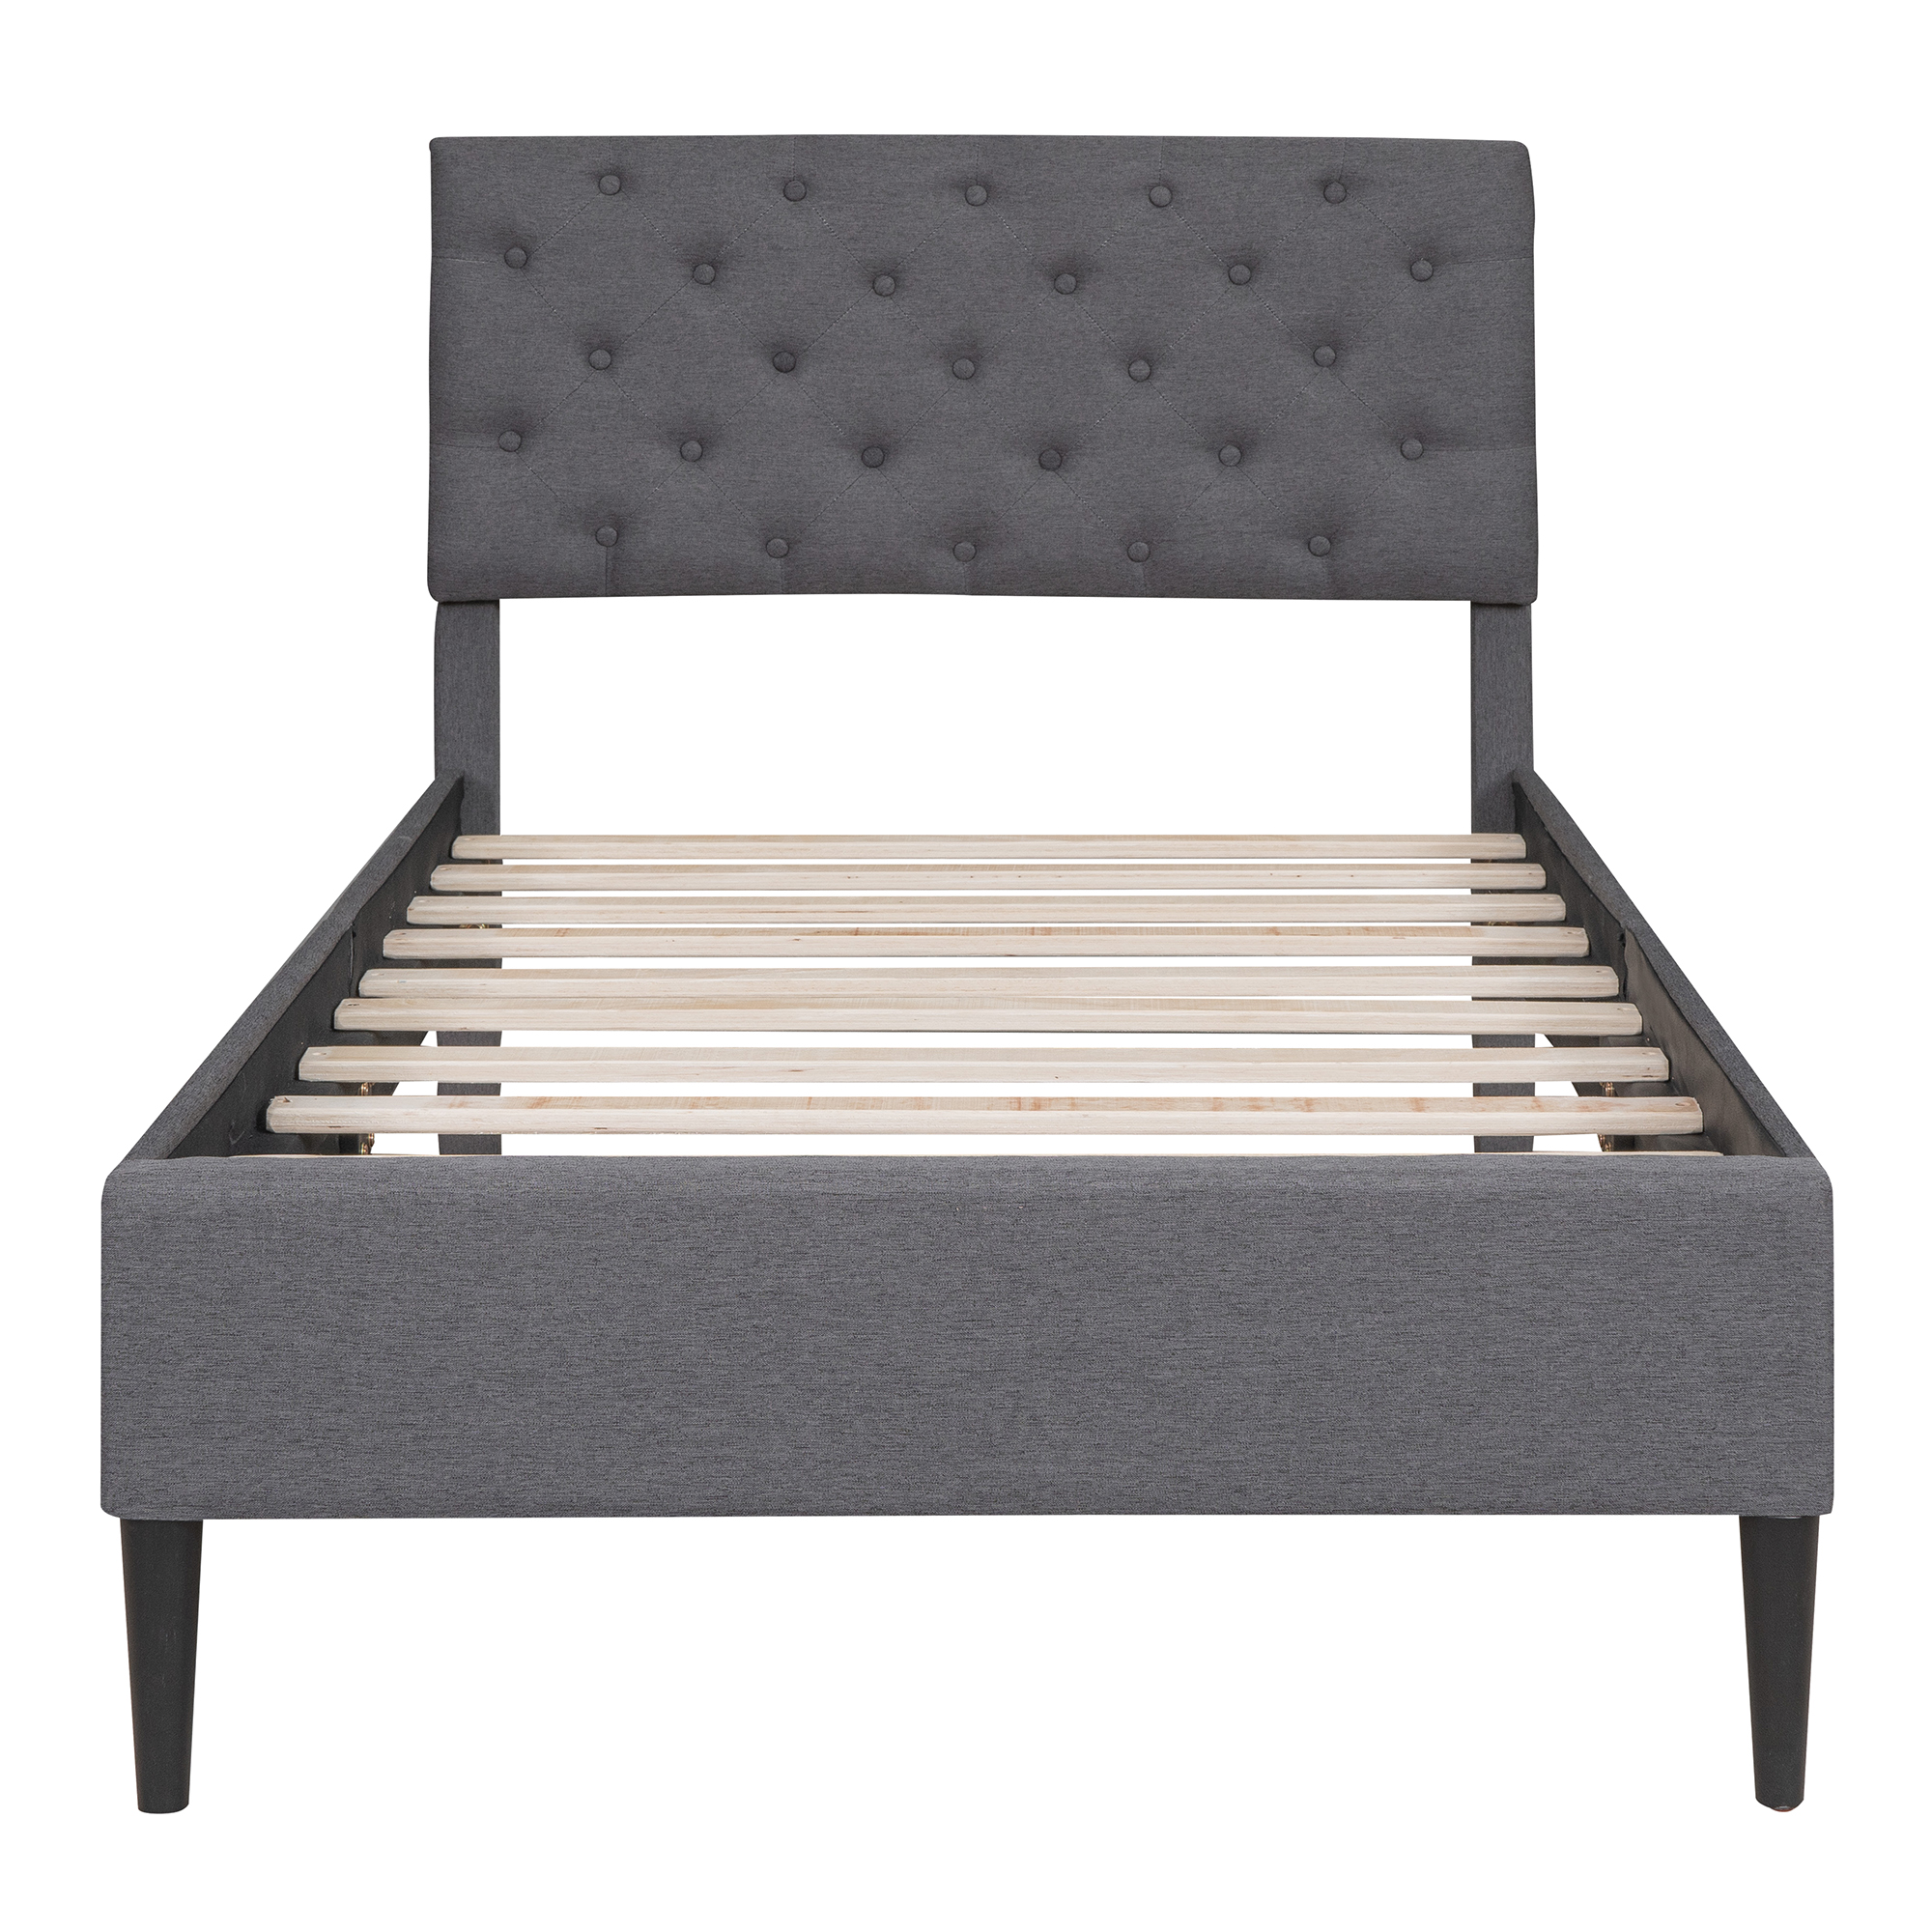 Modern Upholstered Platform Twin Bed Frame, Heavy Duty Twin Bed Frame with Headboard, Gray Twin Bed Frame with Wood Slat Support, Mattress Foundation for Adults Kids, No Box Spring Needed, Q10586 - image 3 of 10